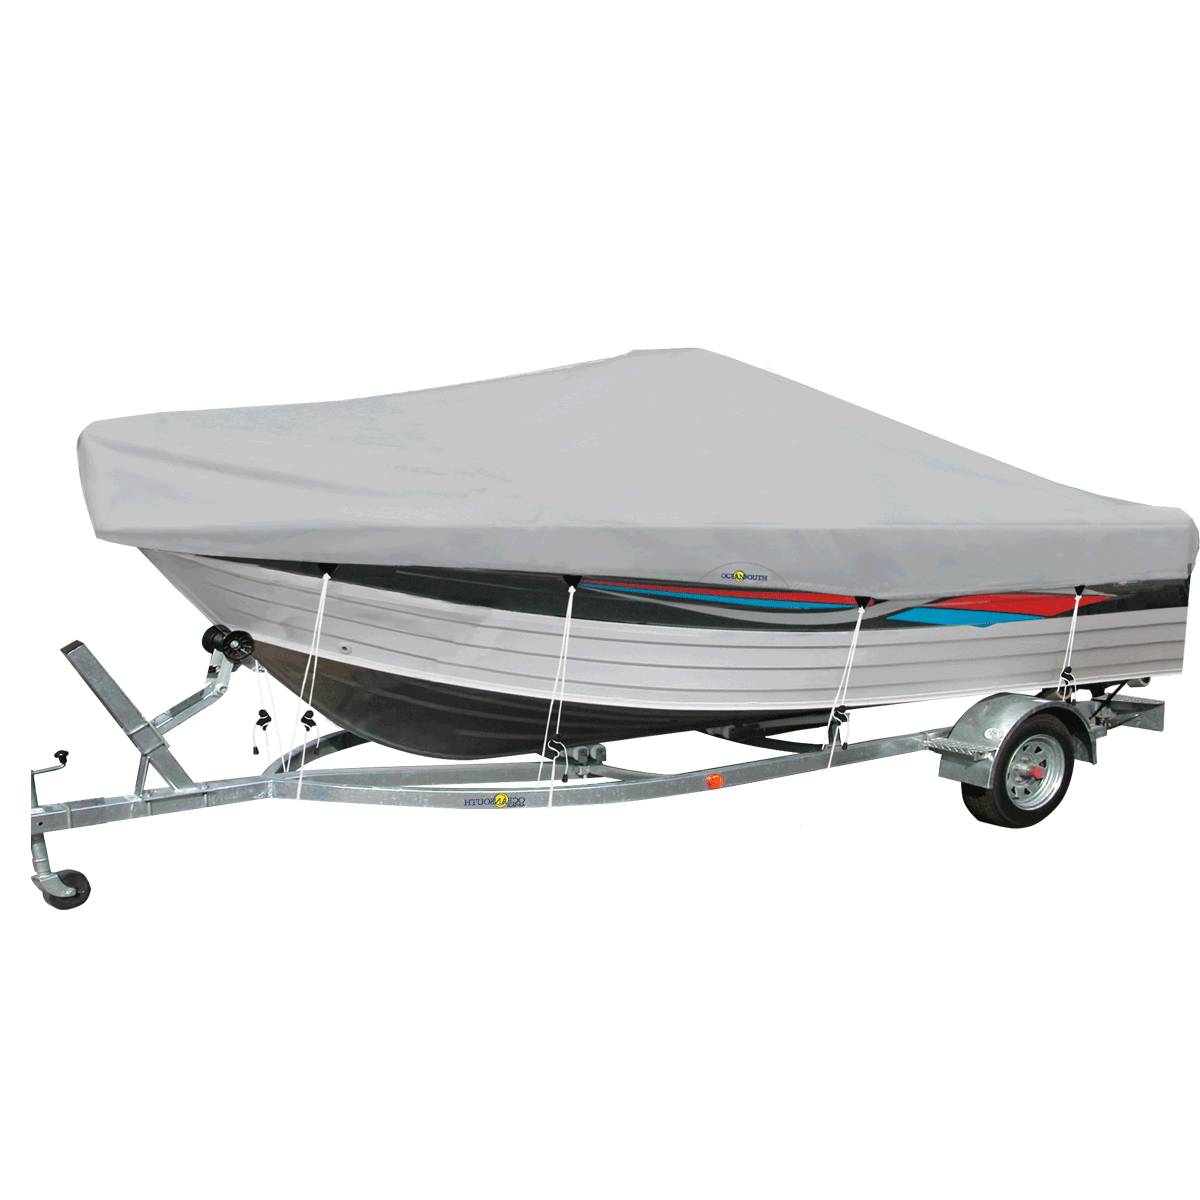 Center Console Boat Covers | Oceansouth